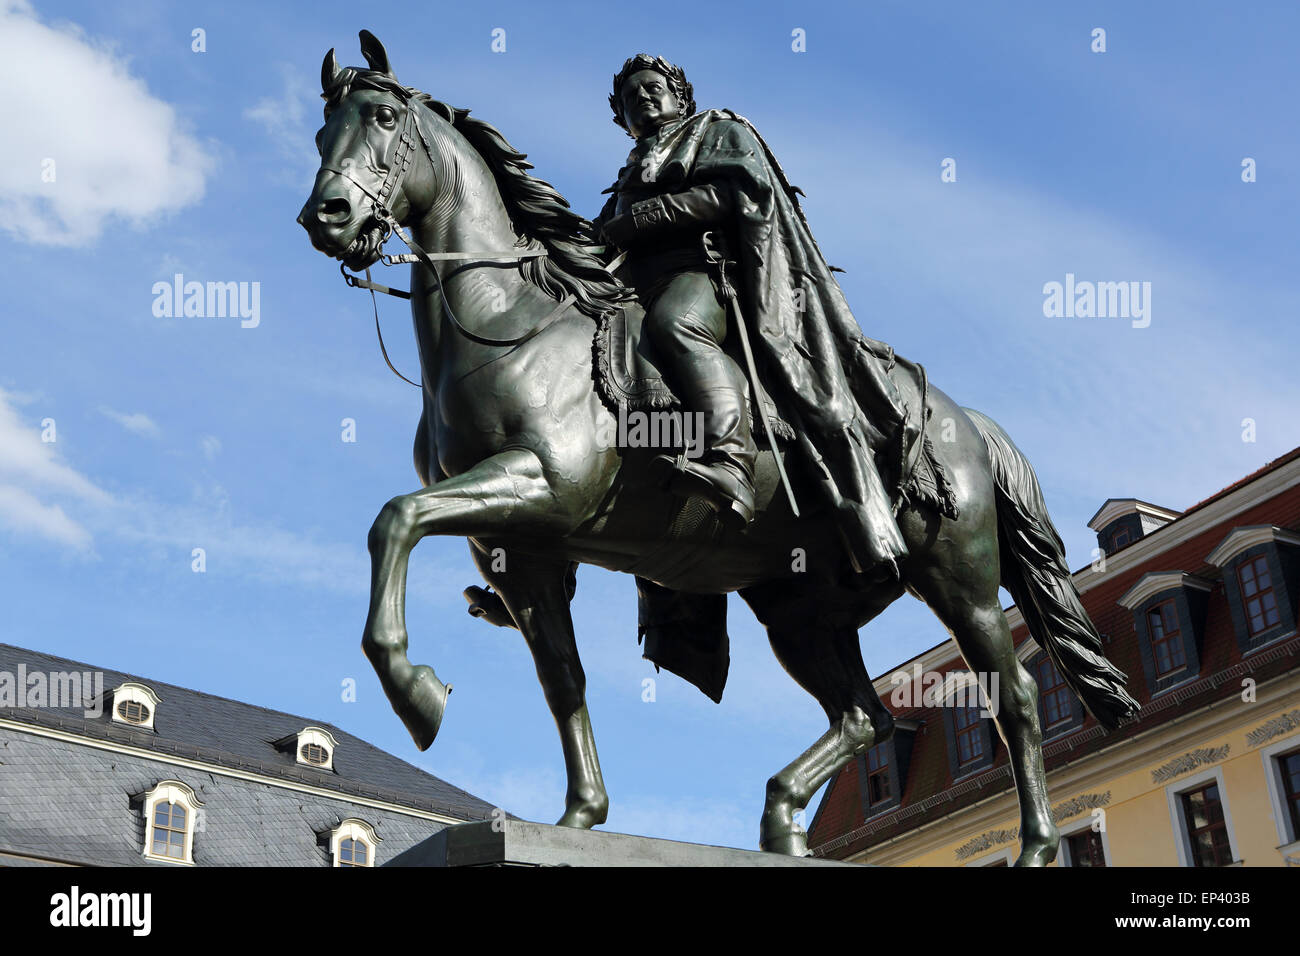 Equine statue of Grand Duke Karl August of Saxe-Weimar-Eisenach (1757 - 1828) in Weimar, Germany. Stock Photo